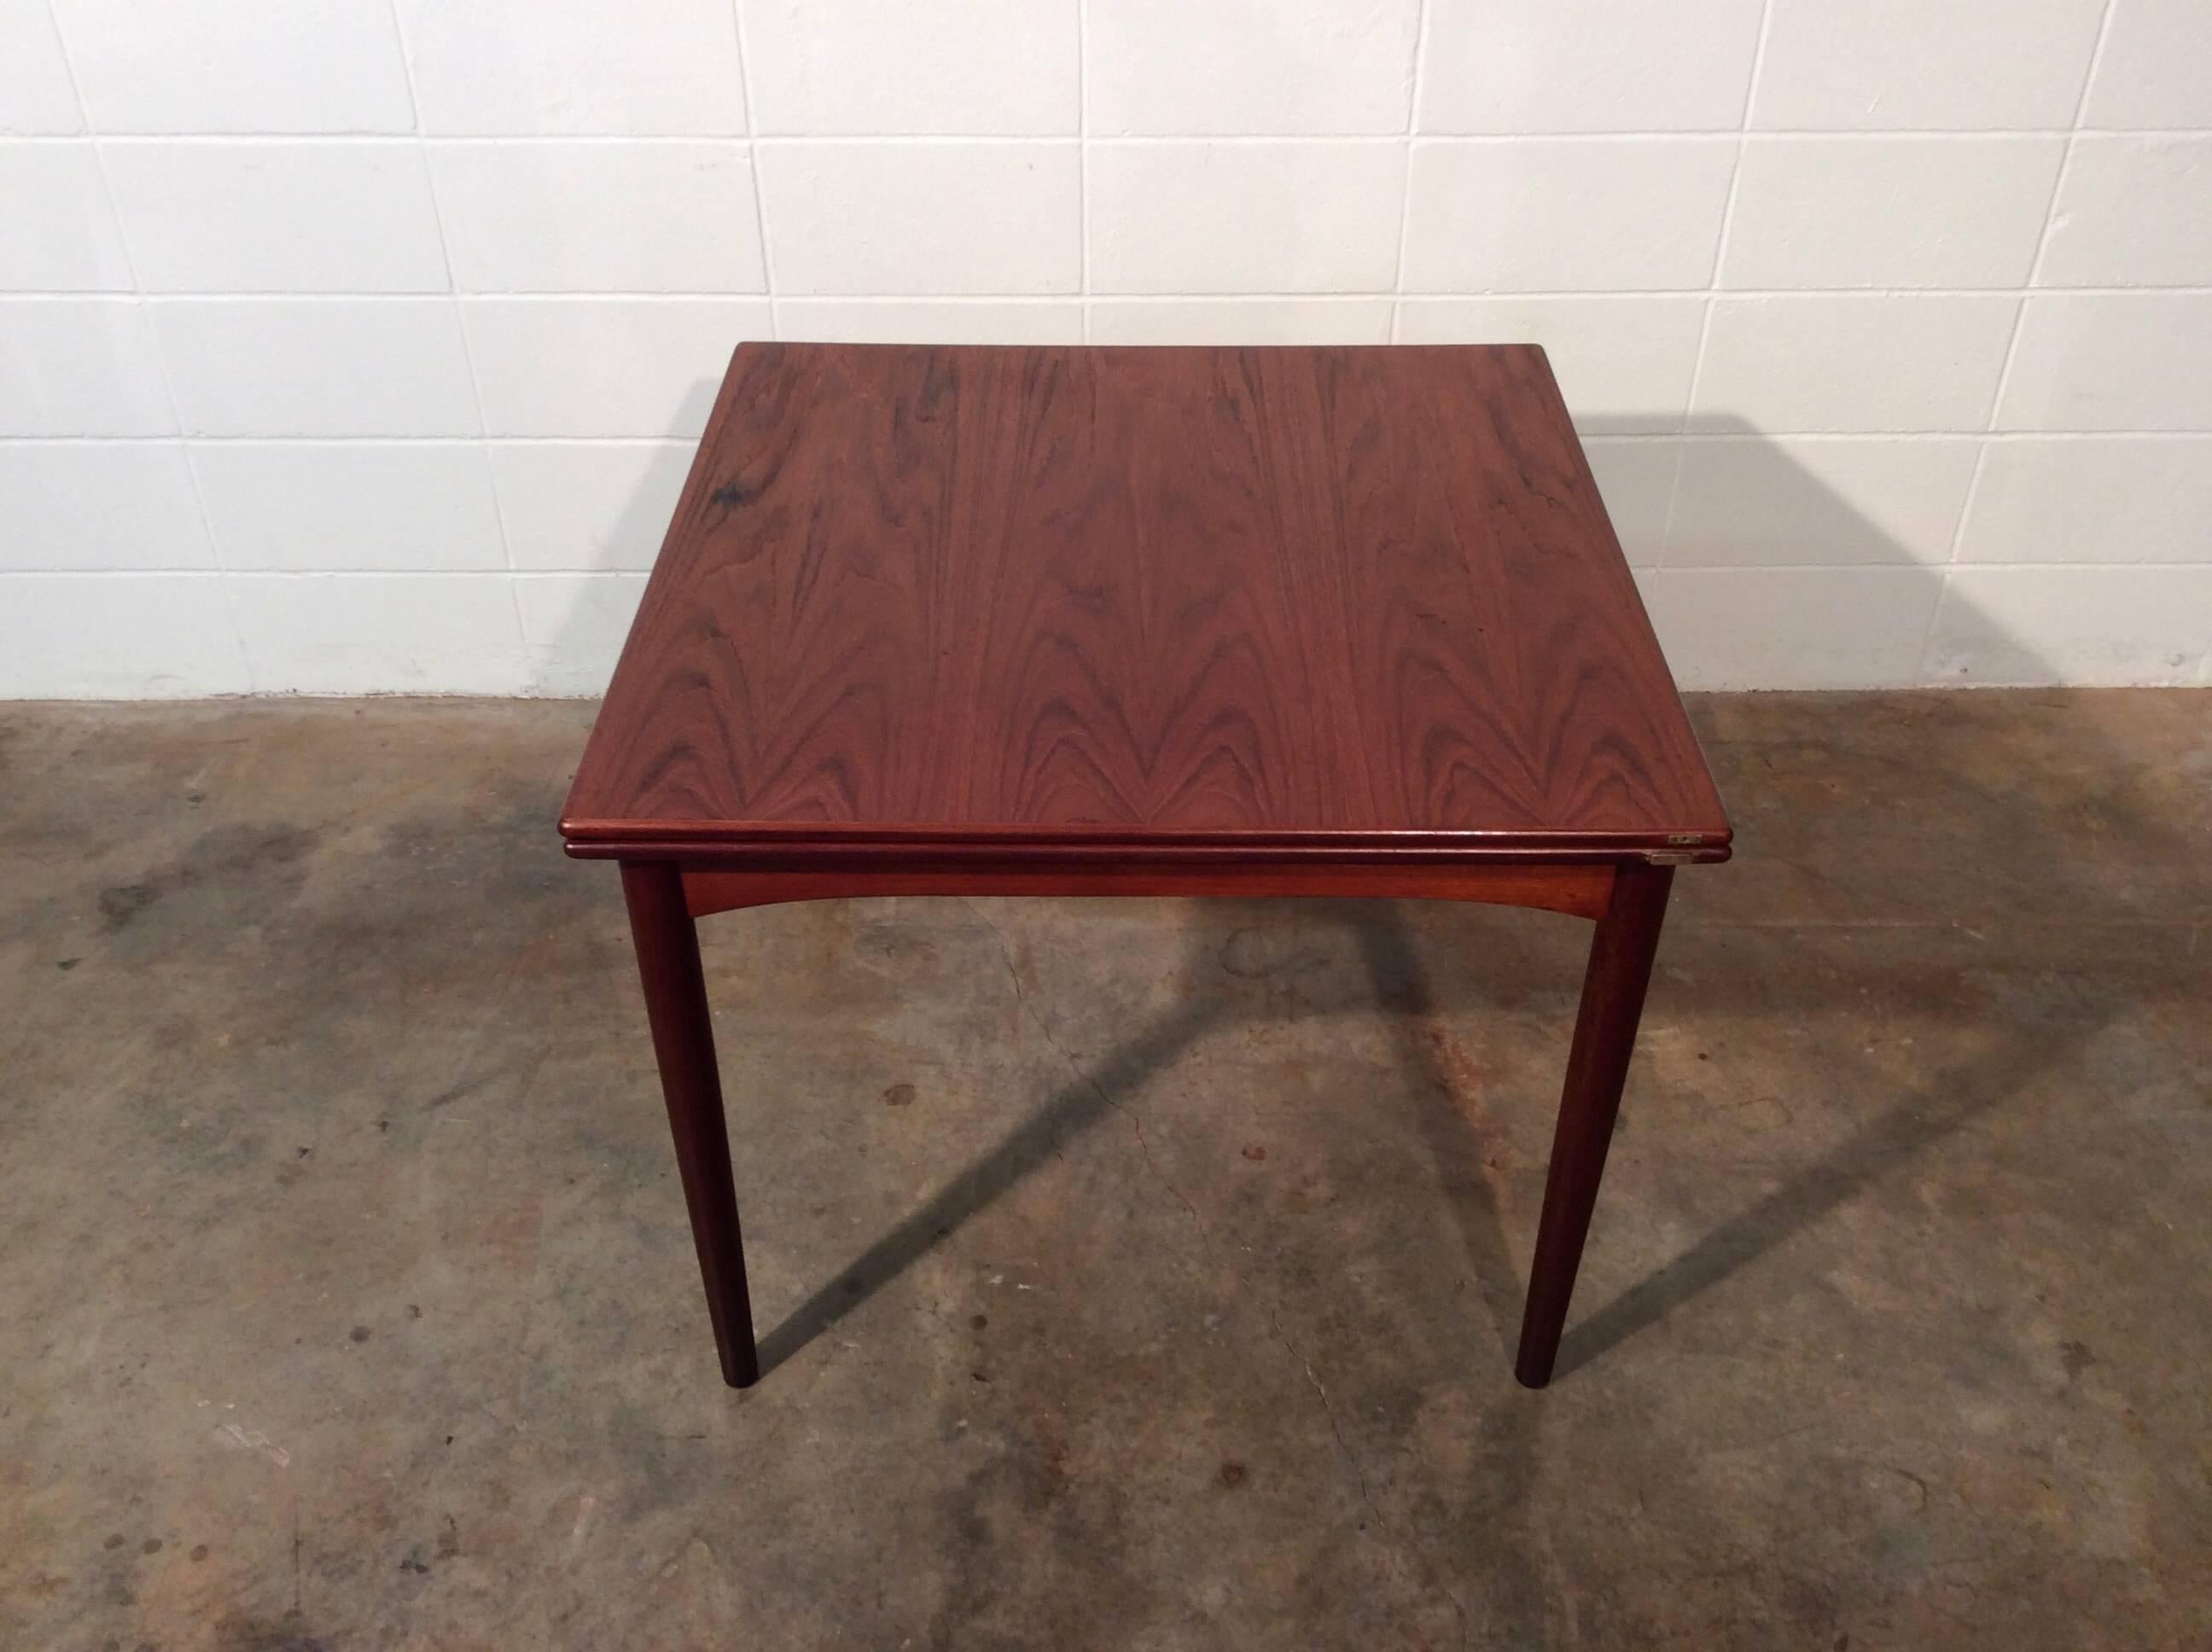 Uncommon Danish modern flip top dining or game table by Børge Mogensen for Soborg Mobelfabrik. High quality construction as with any of Børge Mogensen's designs. This table is very versatile as it could be a dining table, reduce to be a great gaming